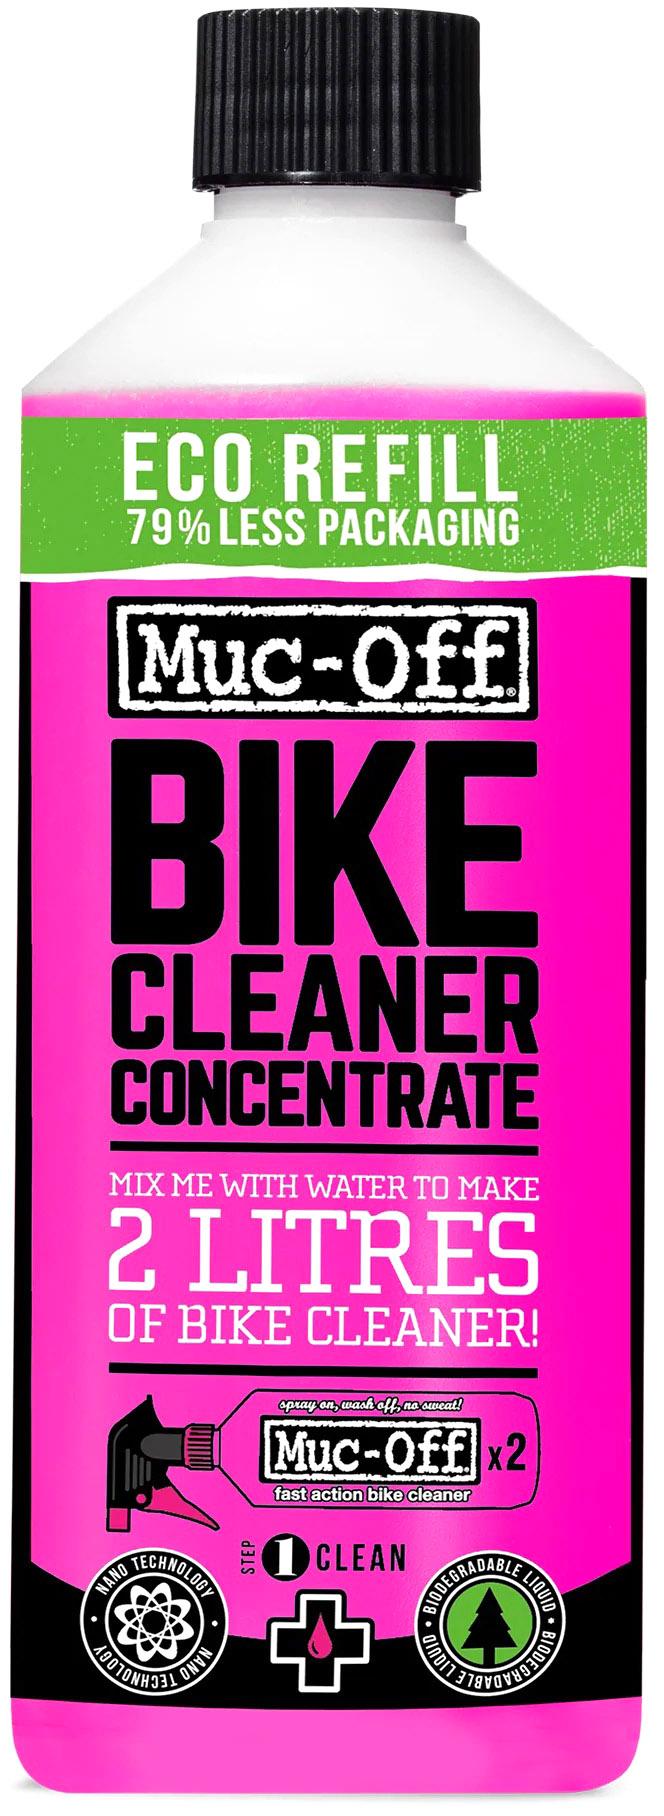 Muc-off Bike Cleaner Concentrate Bottle  Pink